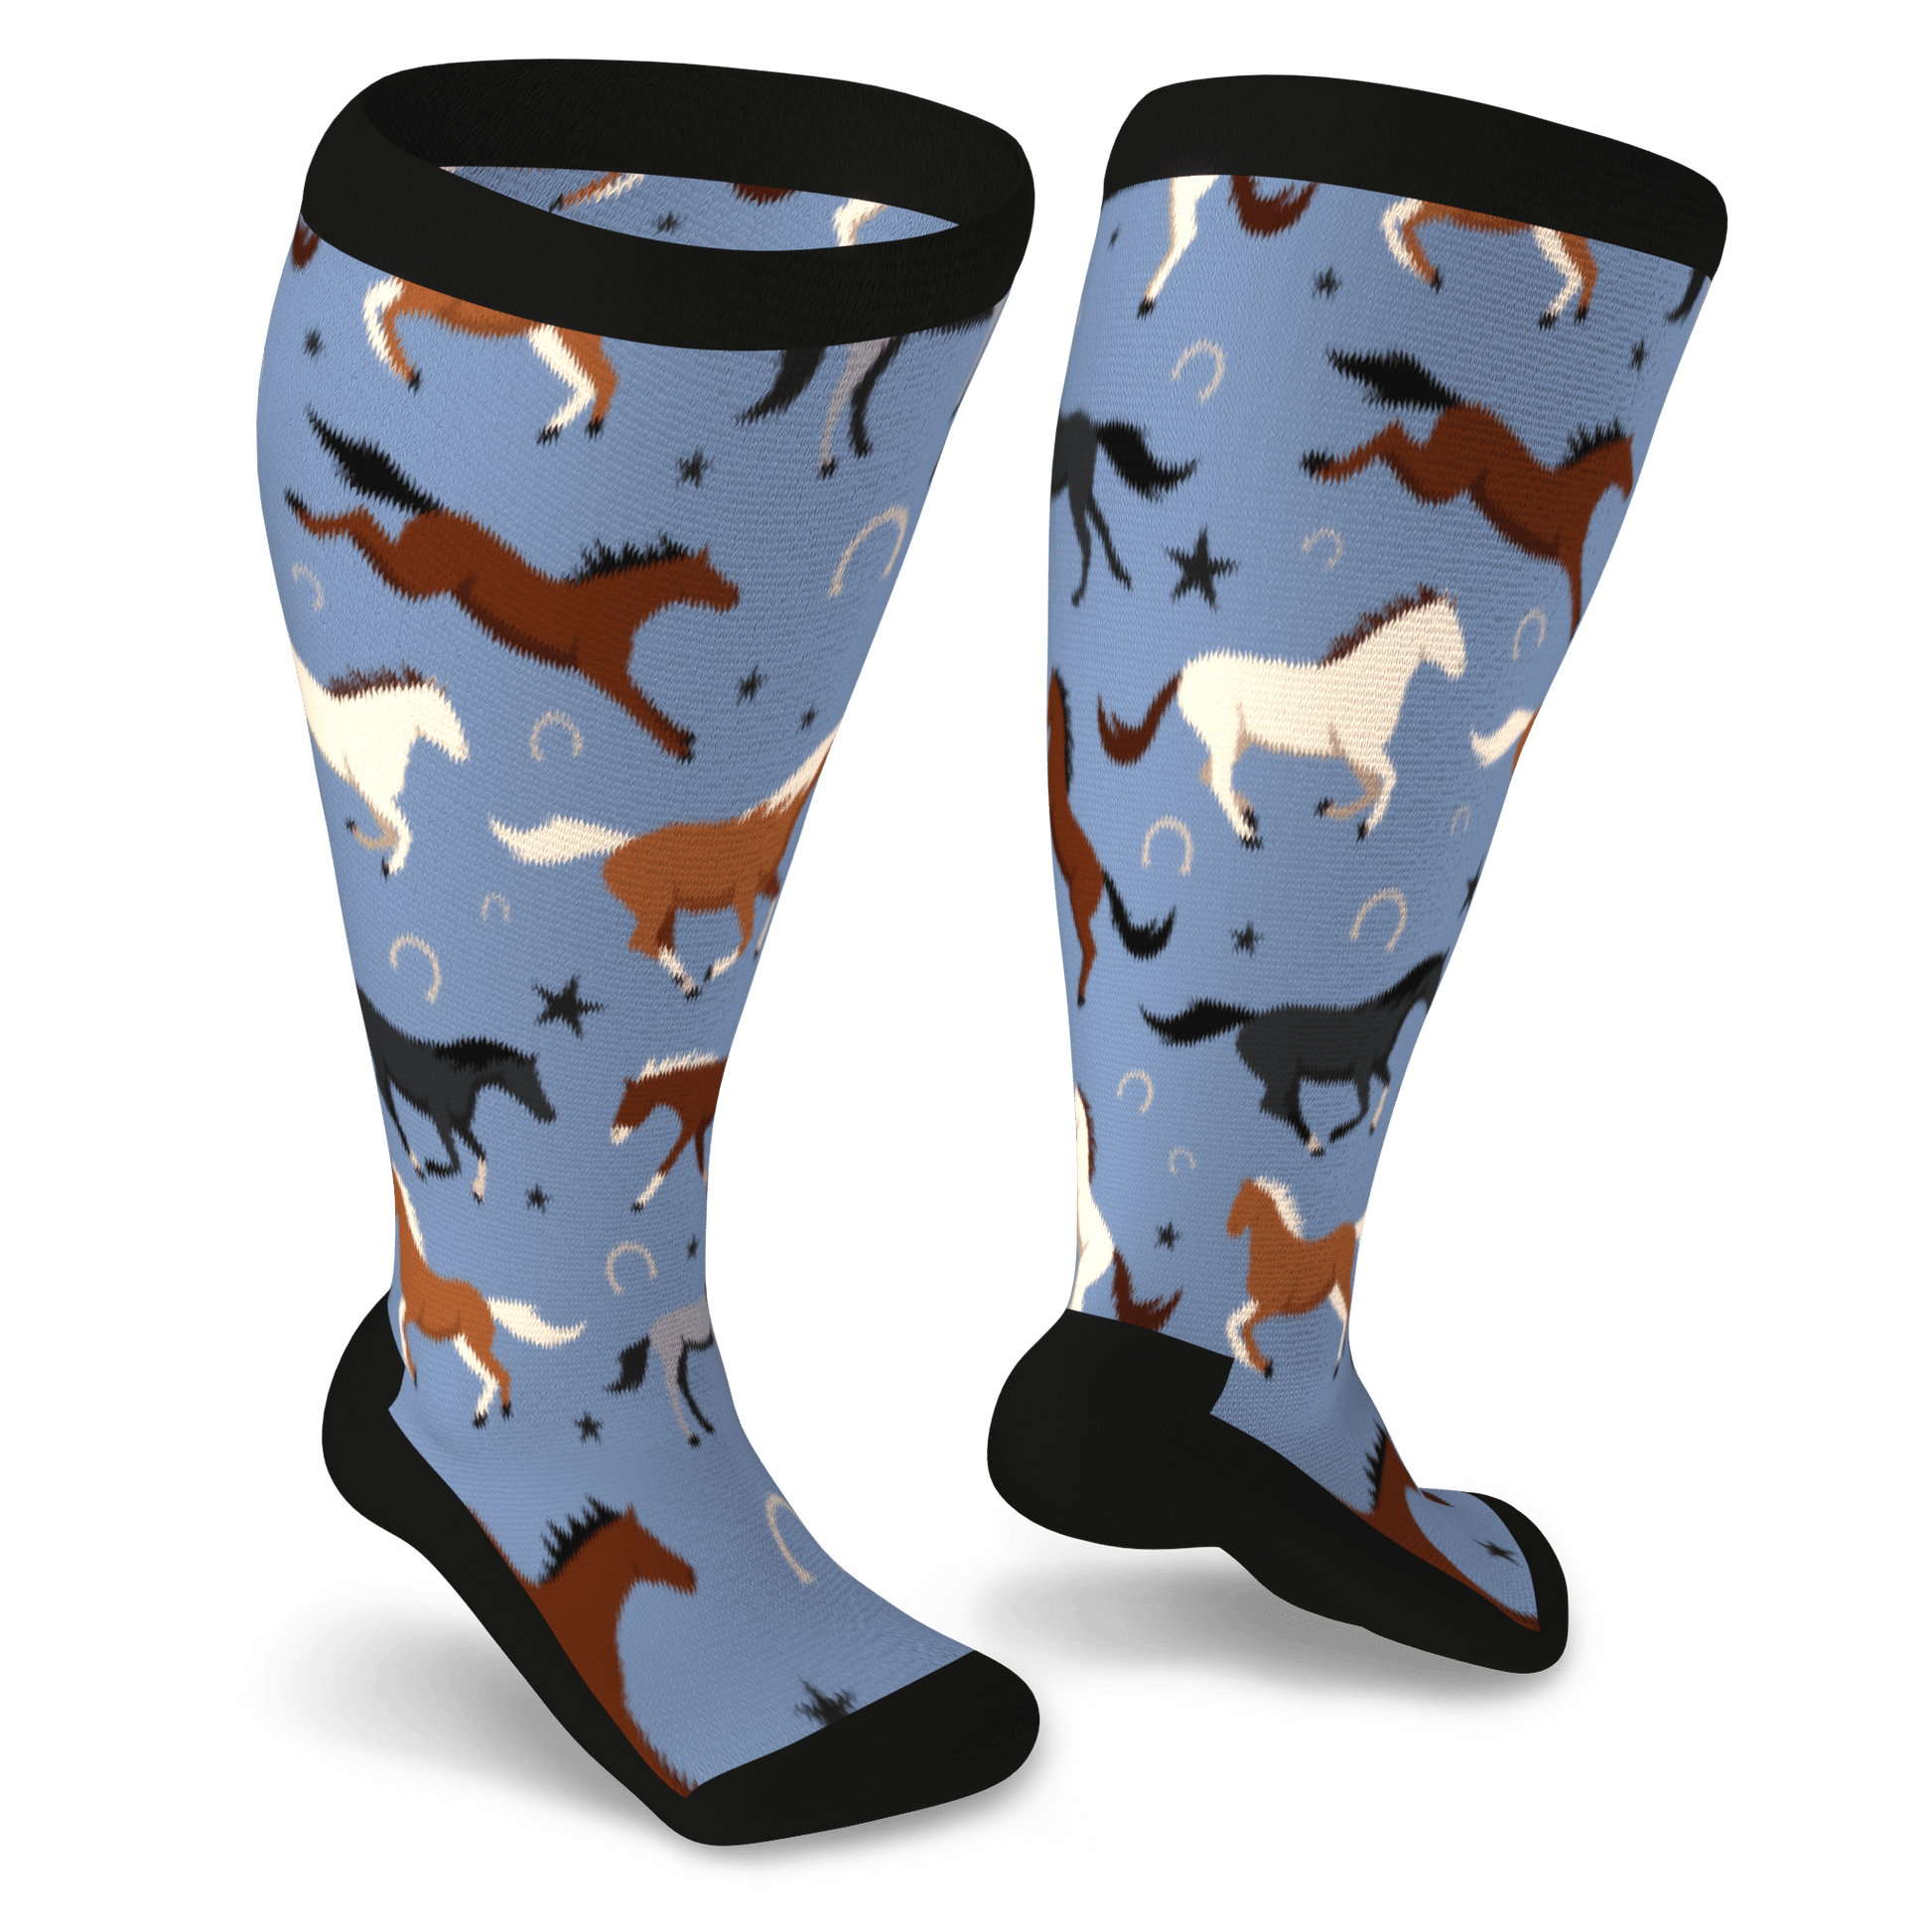 socks with horses on them 